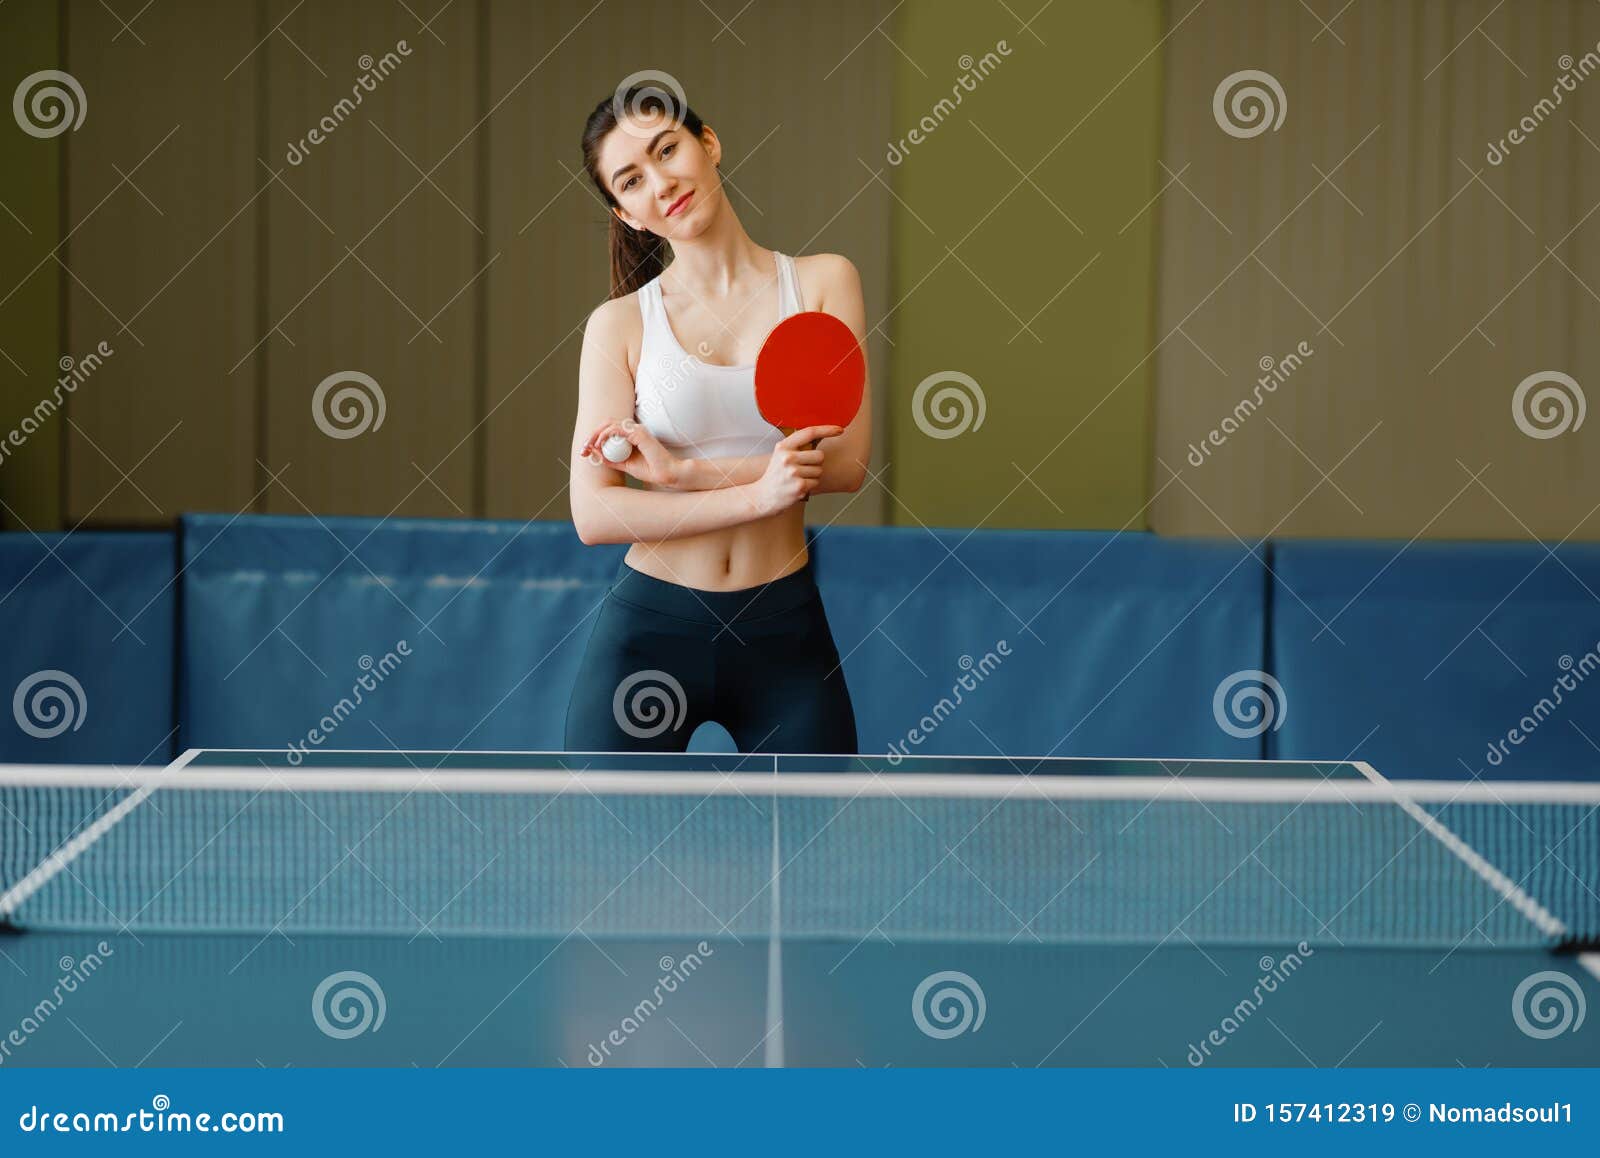 Young Woman  With Ping  Pong  Racket At The Table Stock Image 